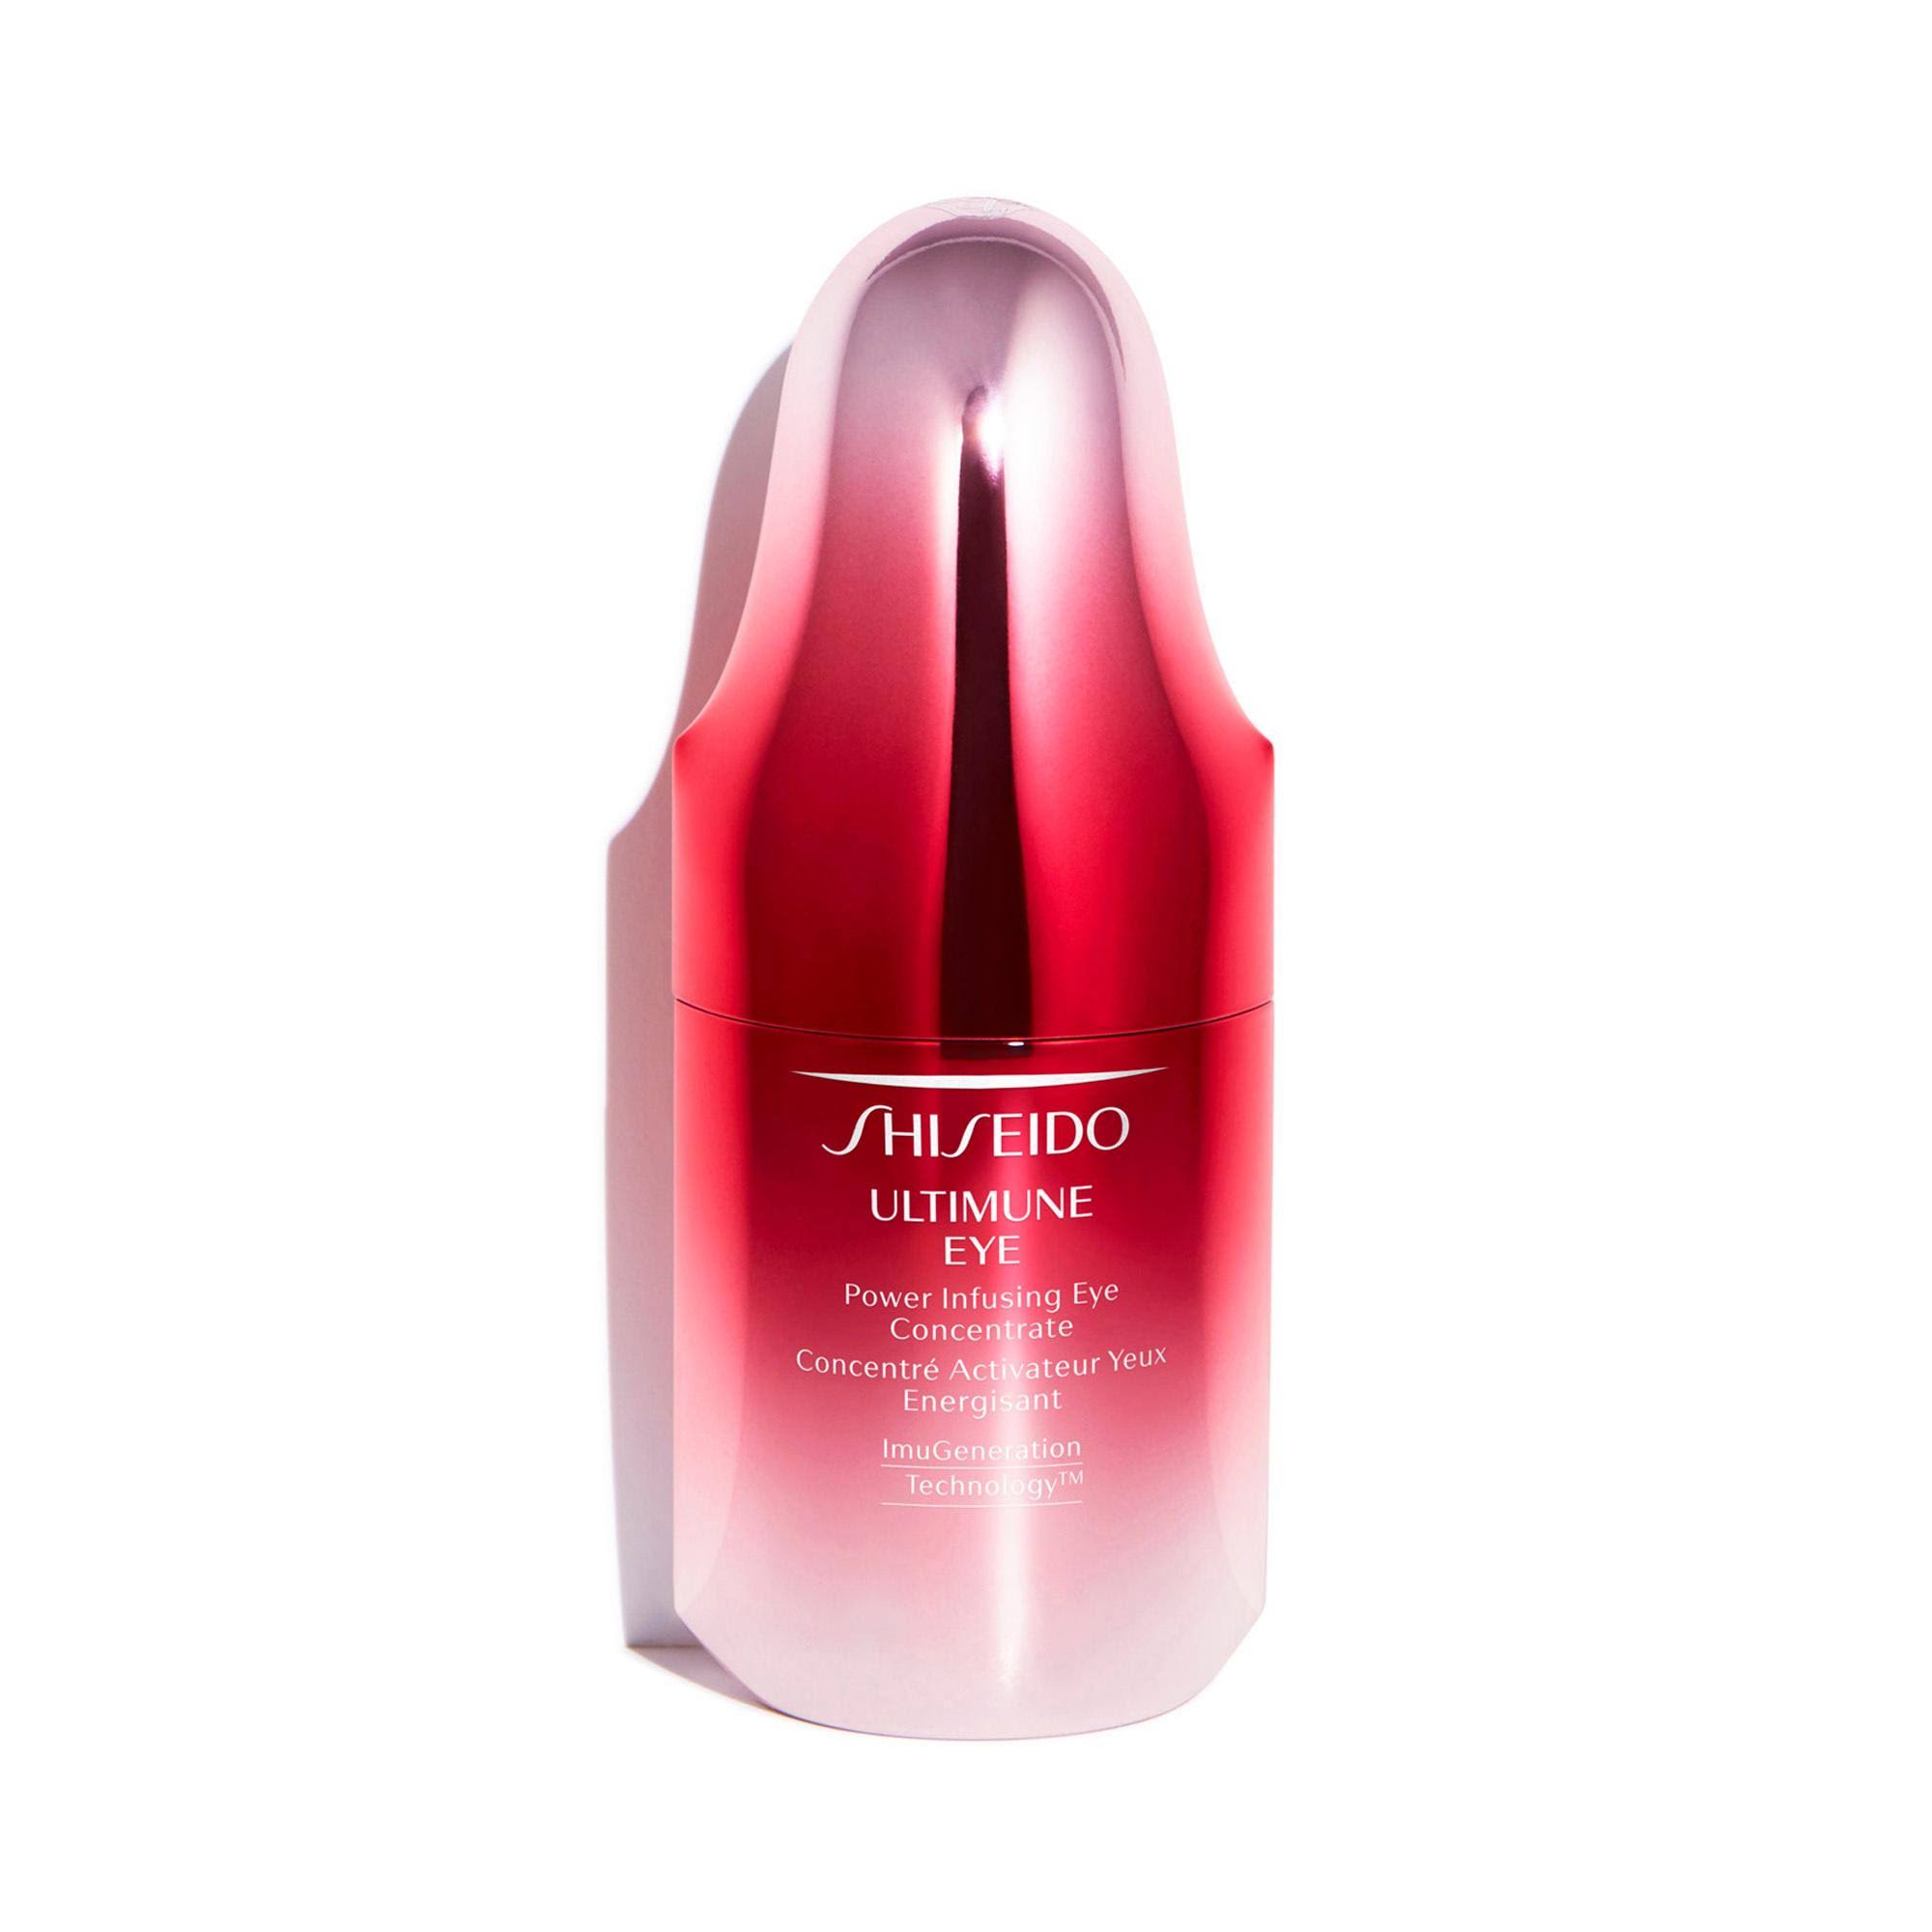 SHISEIDO - ULTIMUNE power infusing eye concentrate 15 ml